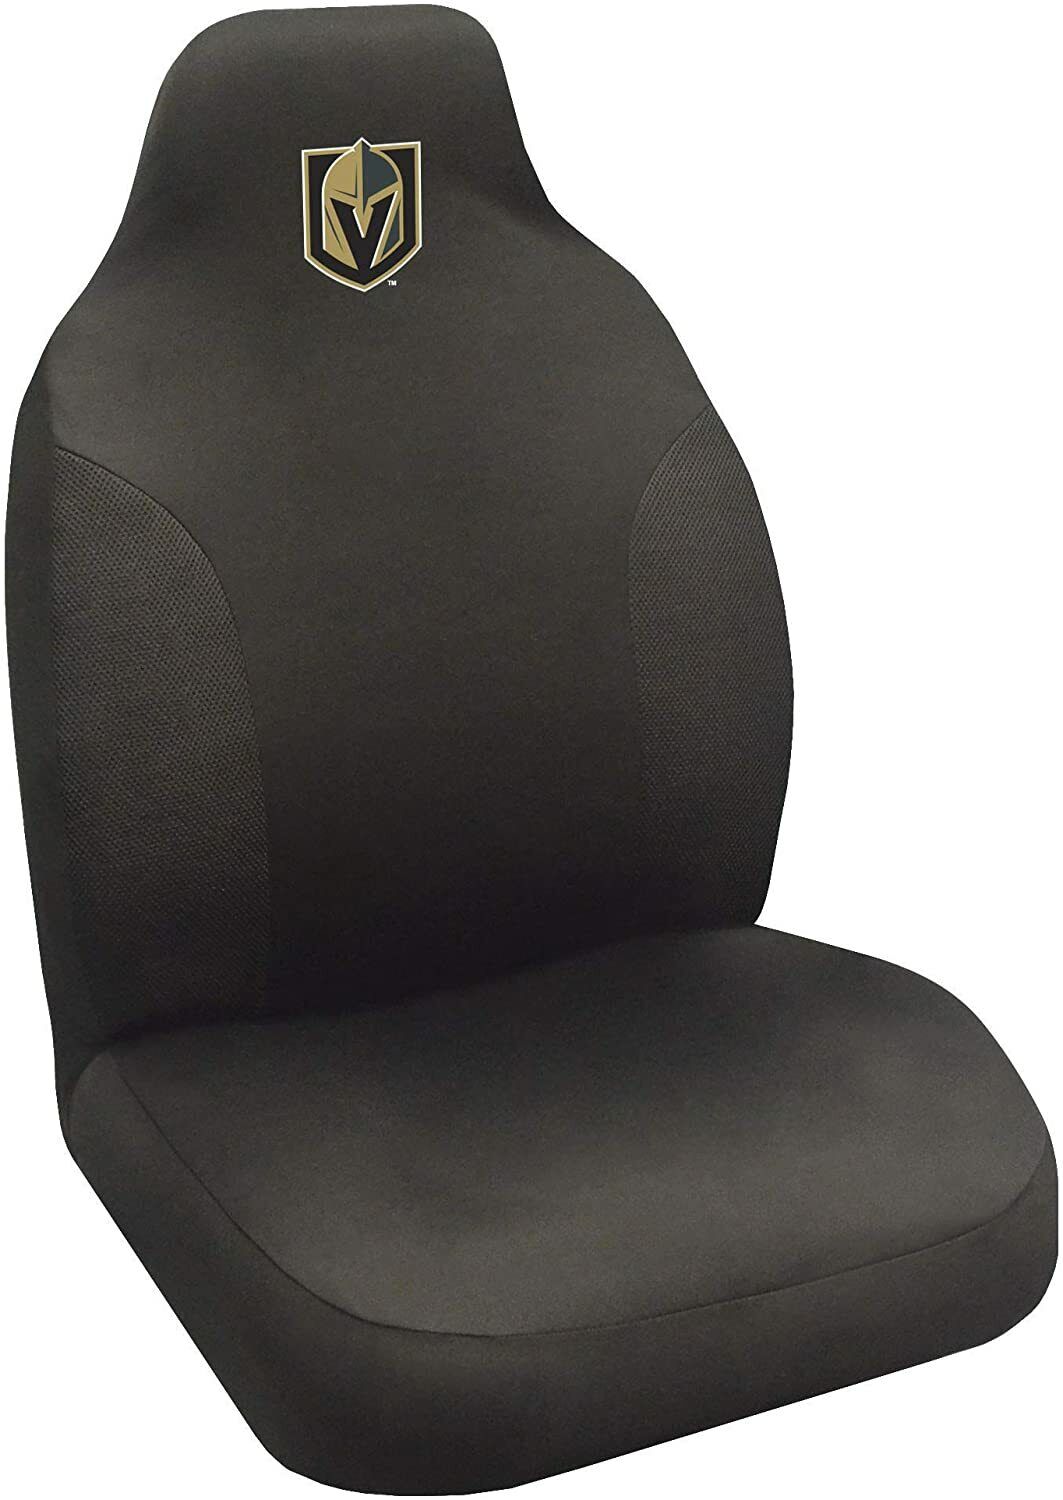 New NHL Las Vegas Golden Knights Car Truck Front Bucket Seat Cover